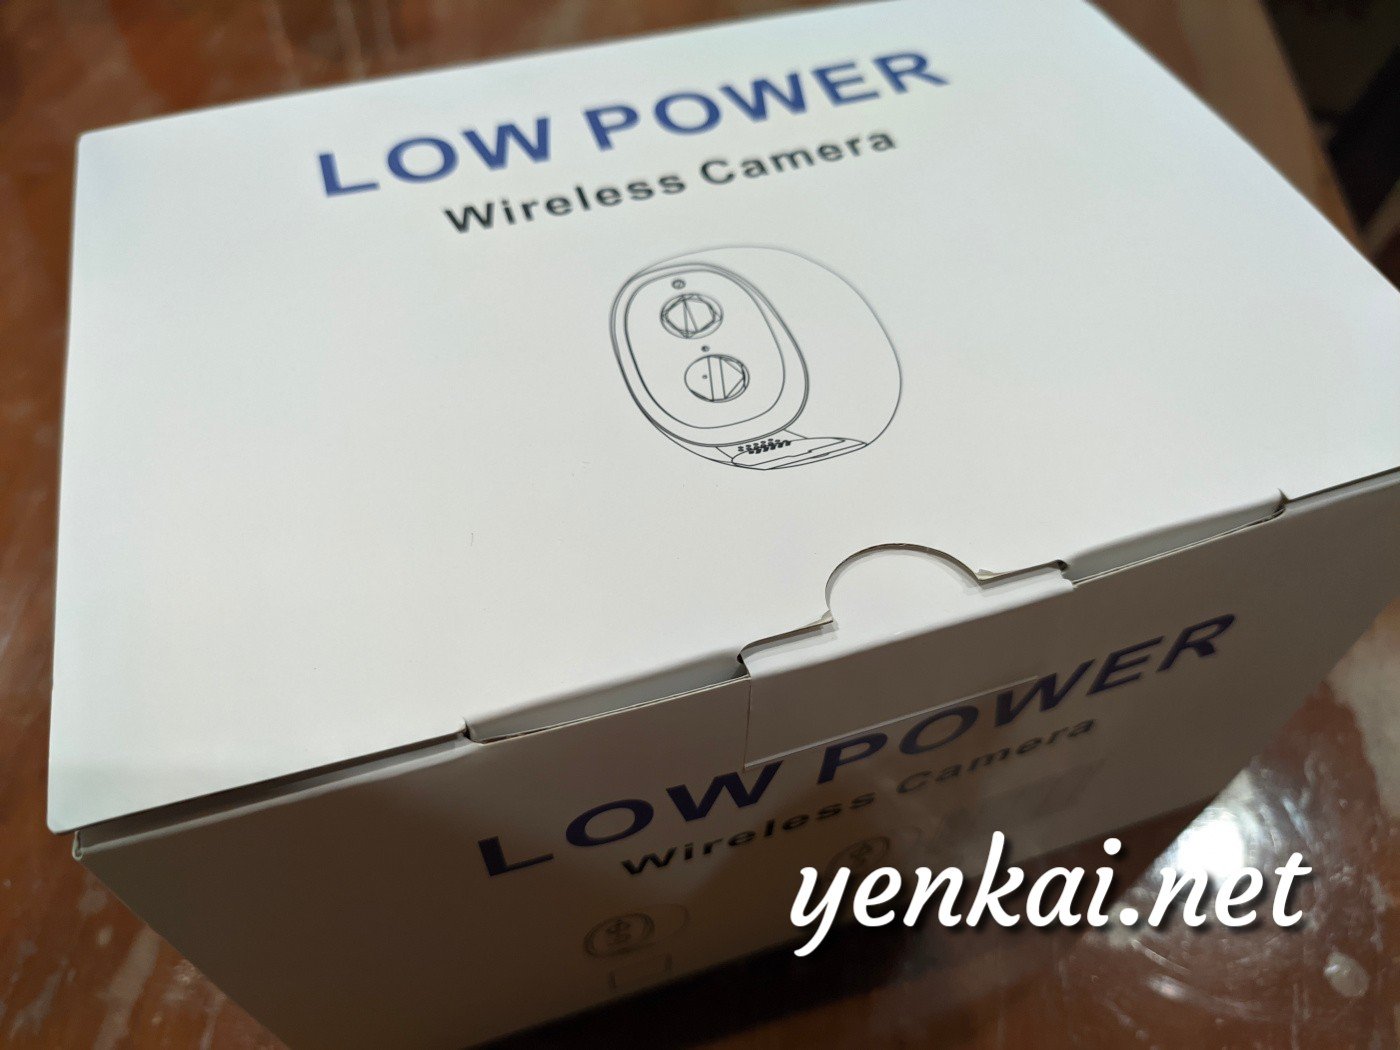 Taobao product recommendation – Low power wireless camera